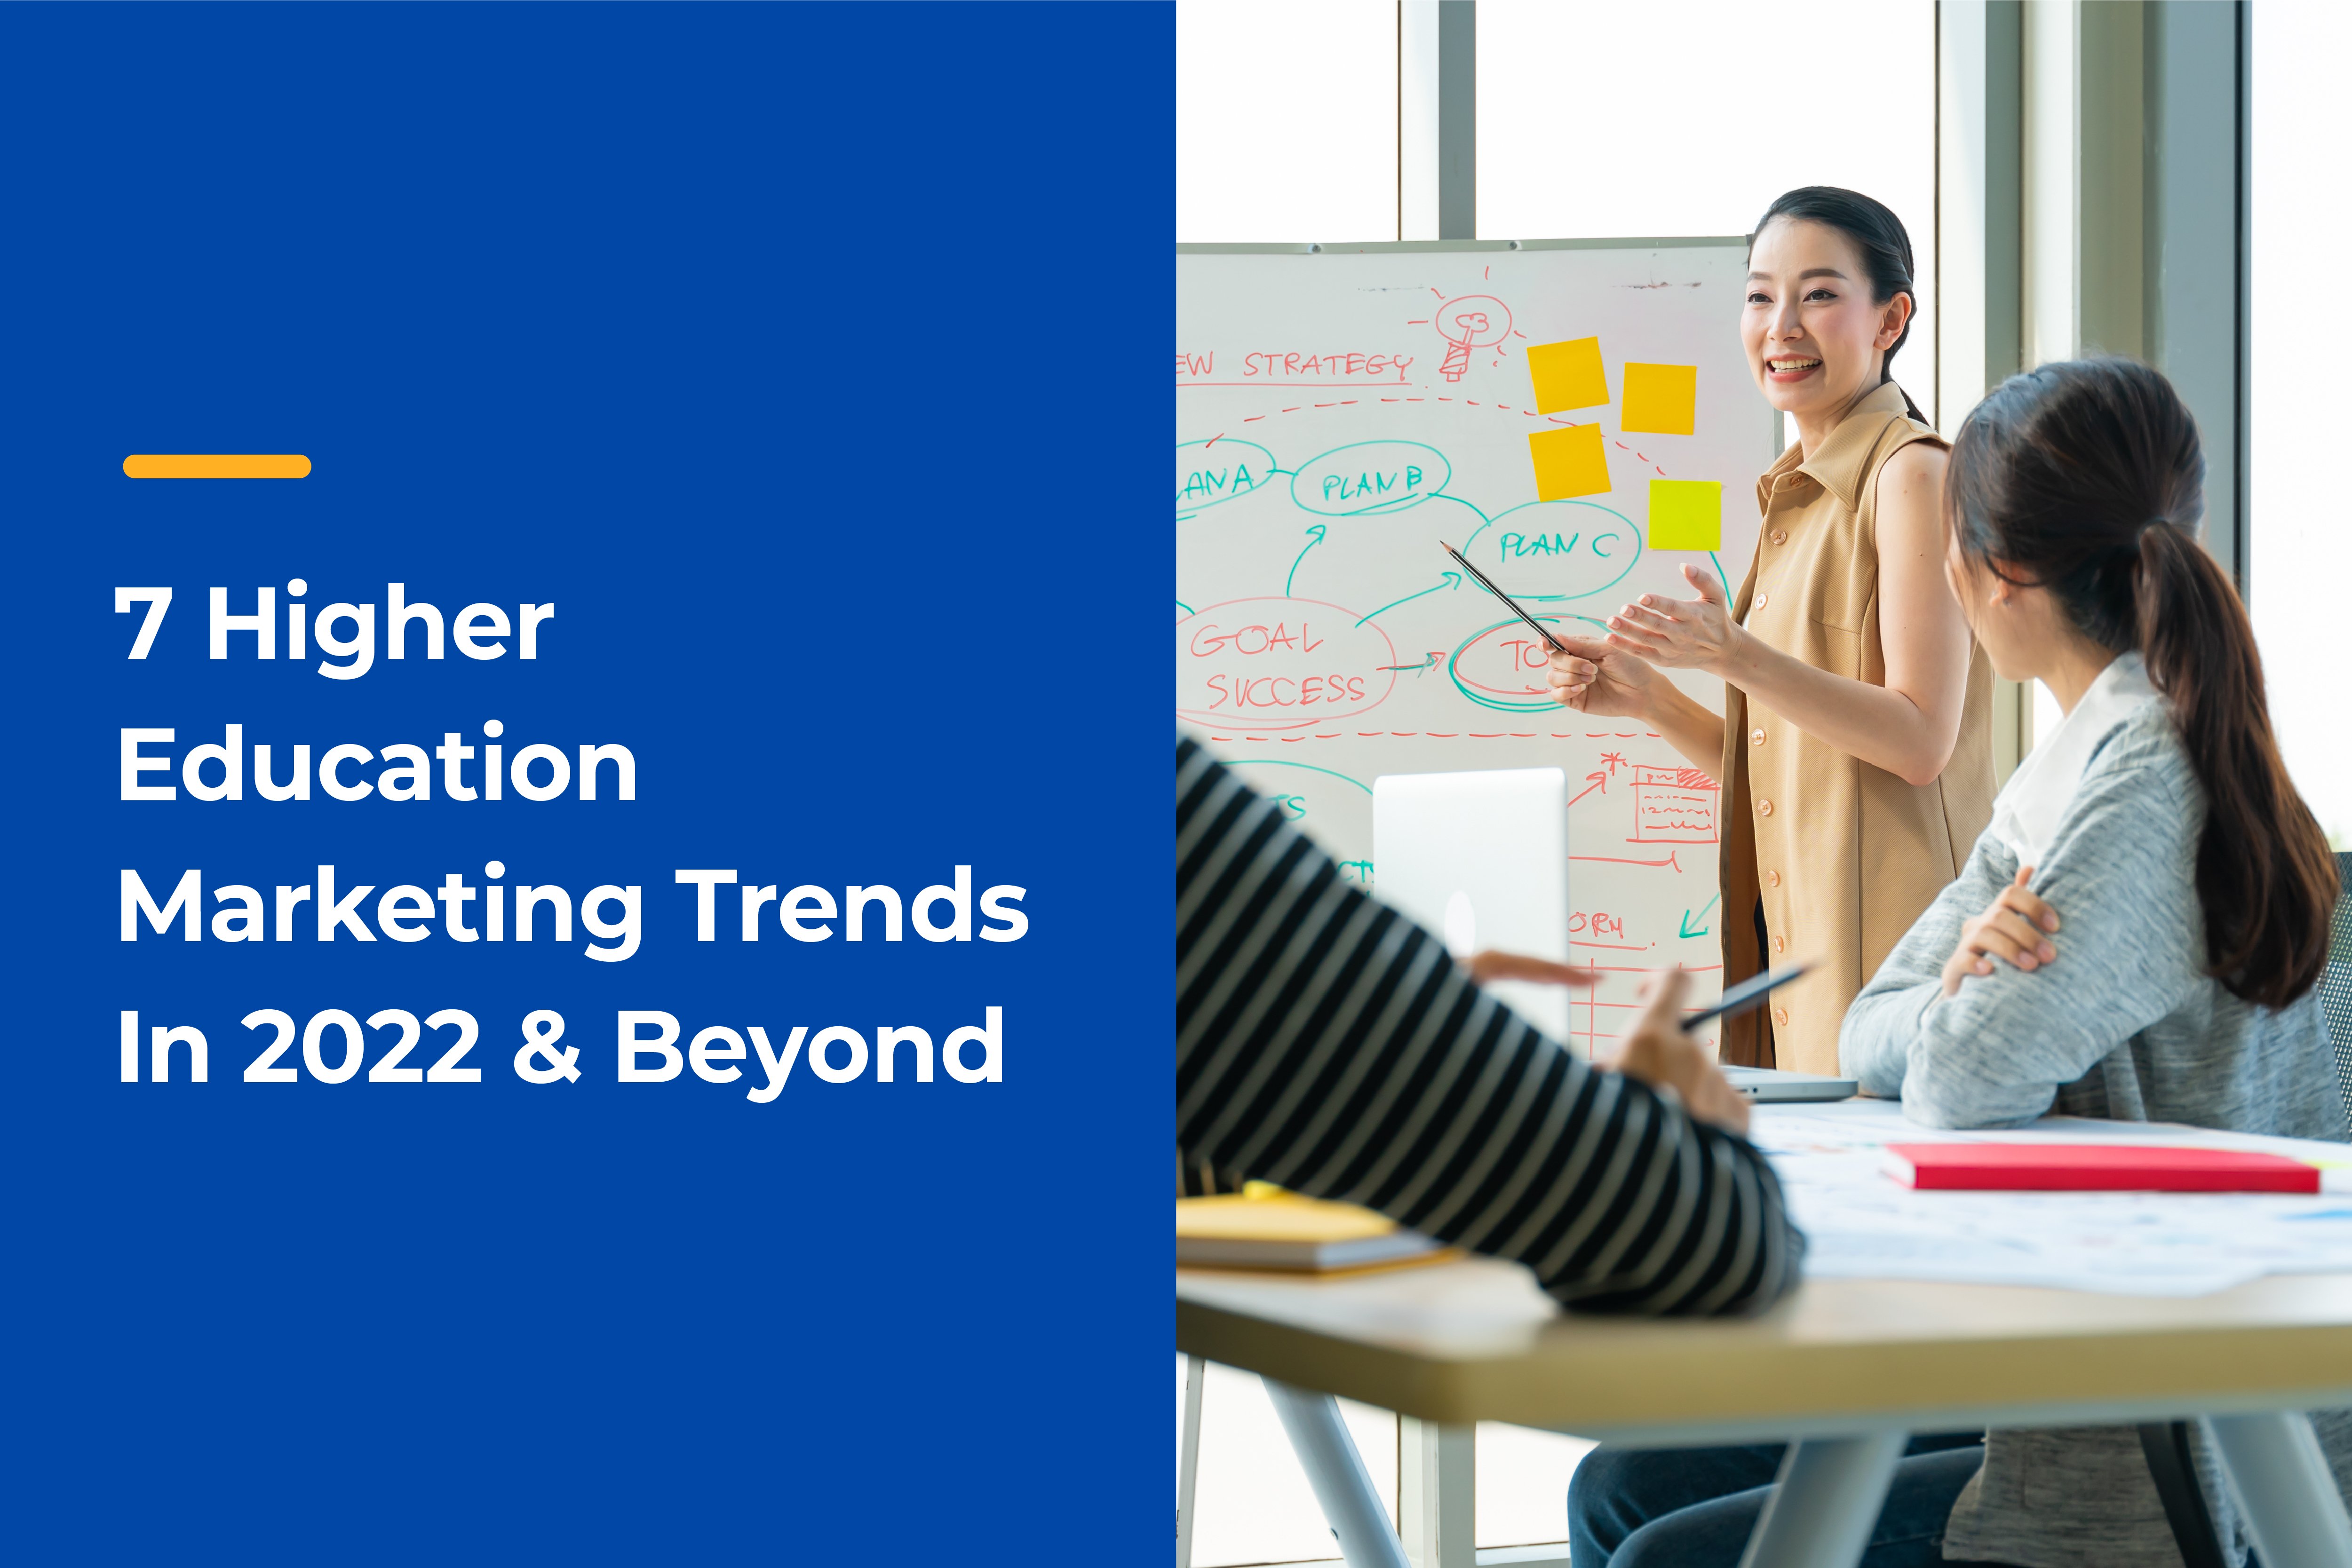 7 Higher Education Marketing Trends In 2022 & Beyond